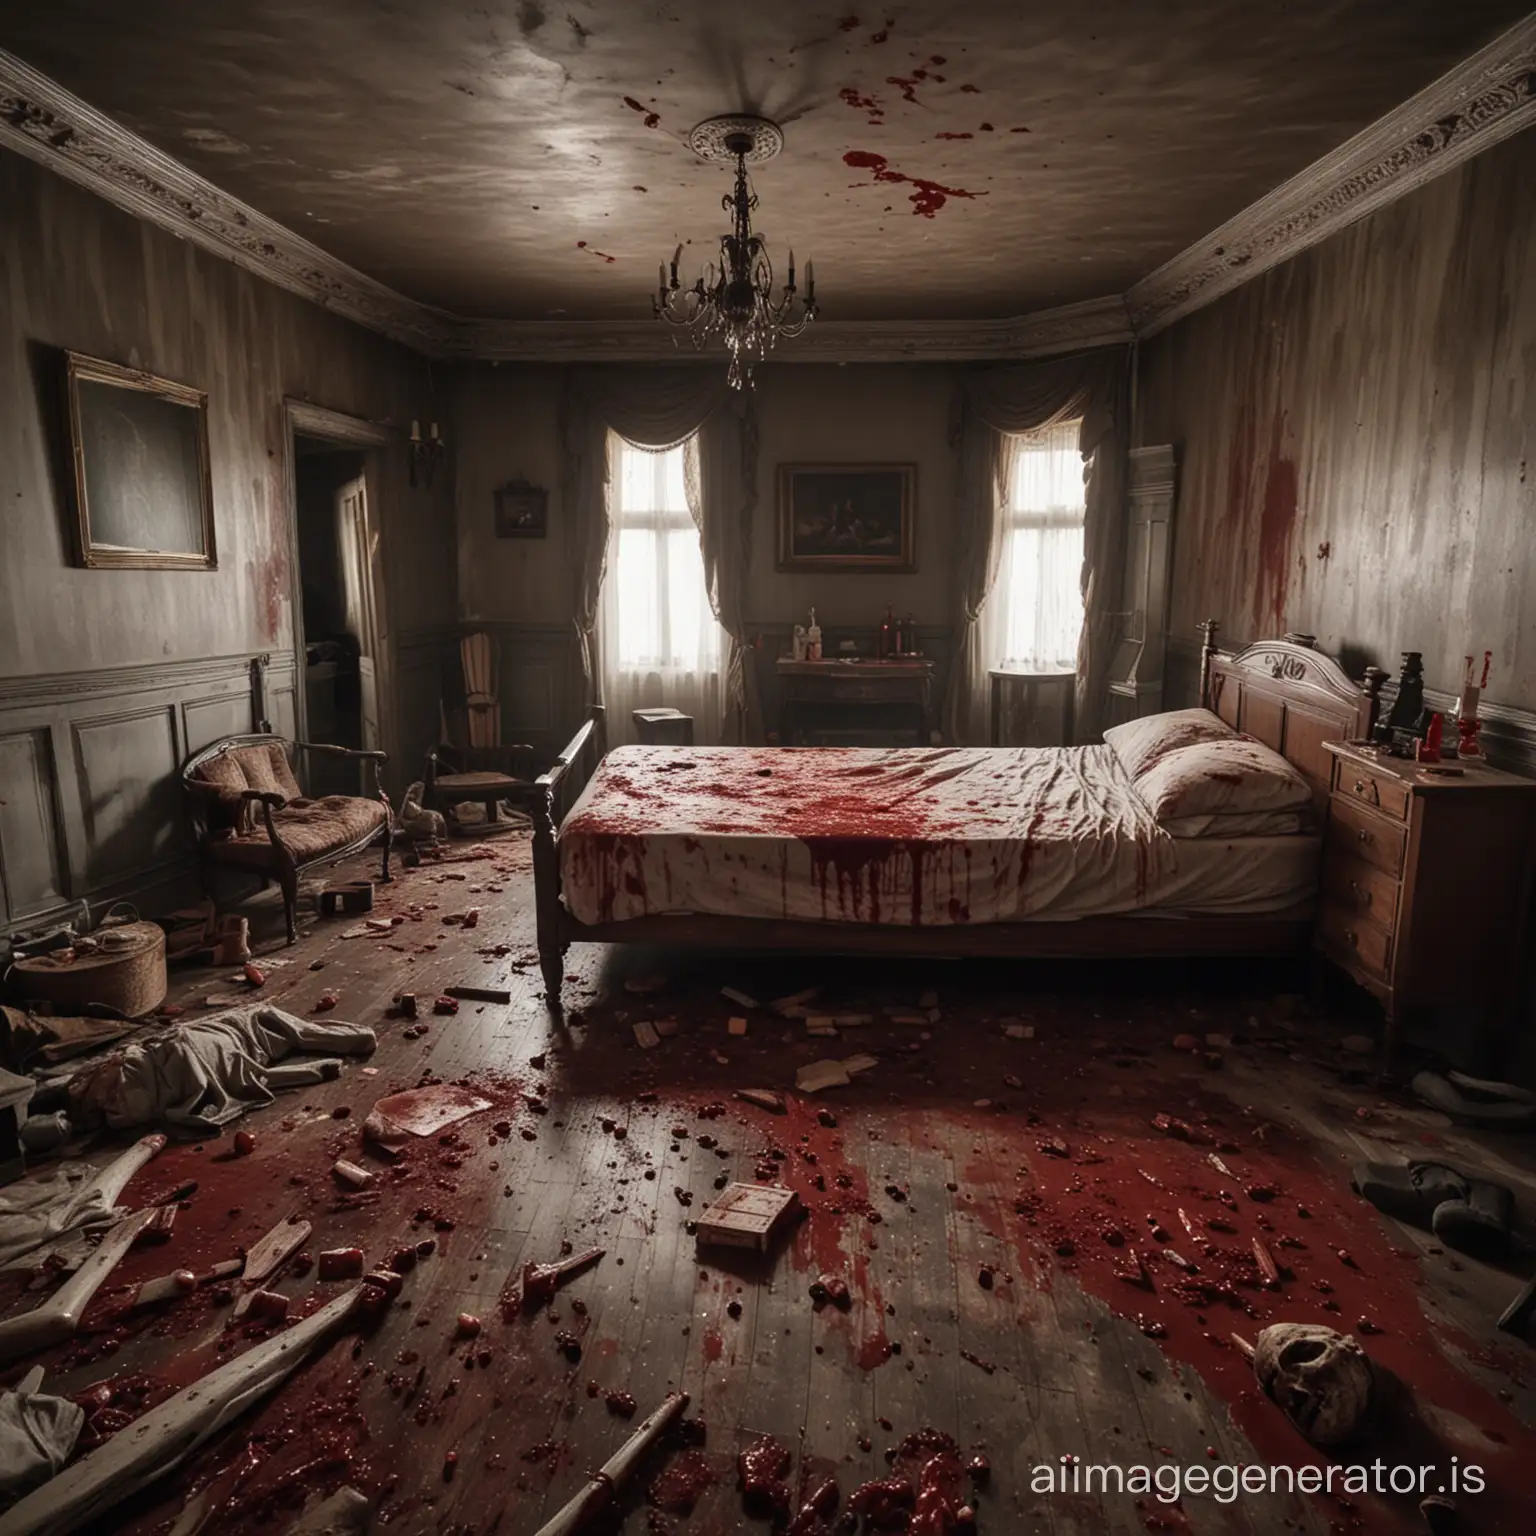 Crime-Scene-in-a-Lavishly-Furnished-Room-with-a-Deceased-Body